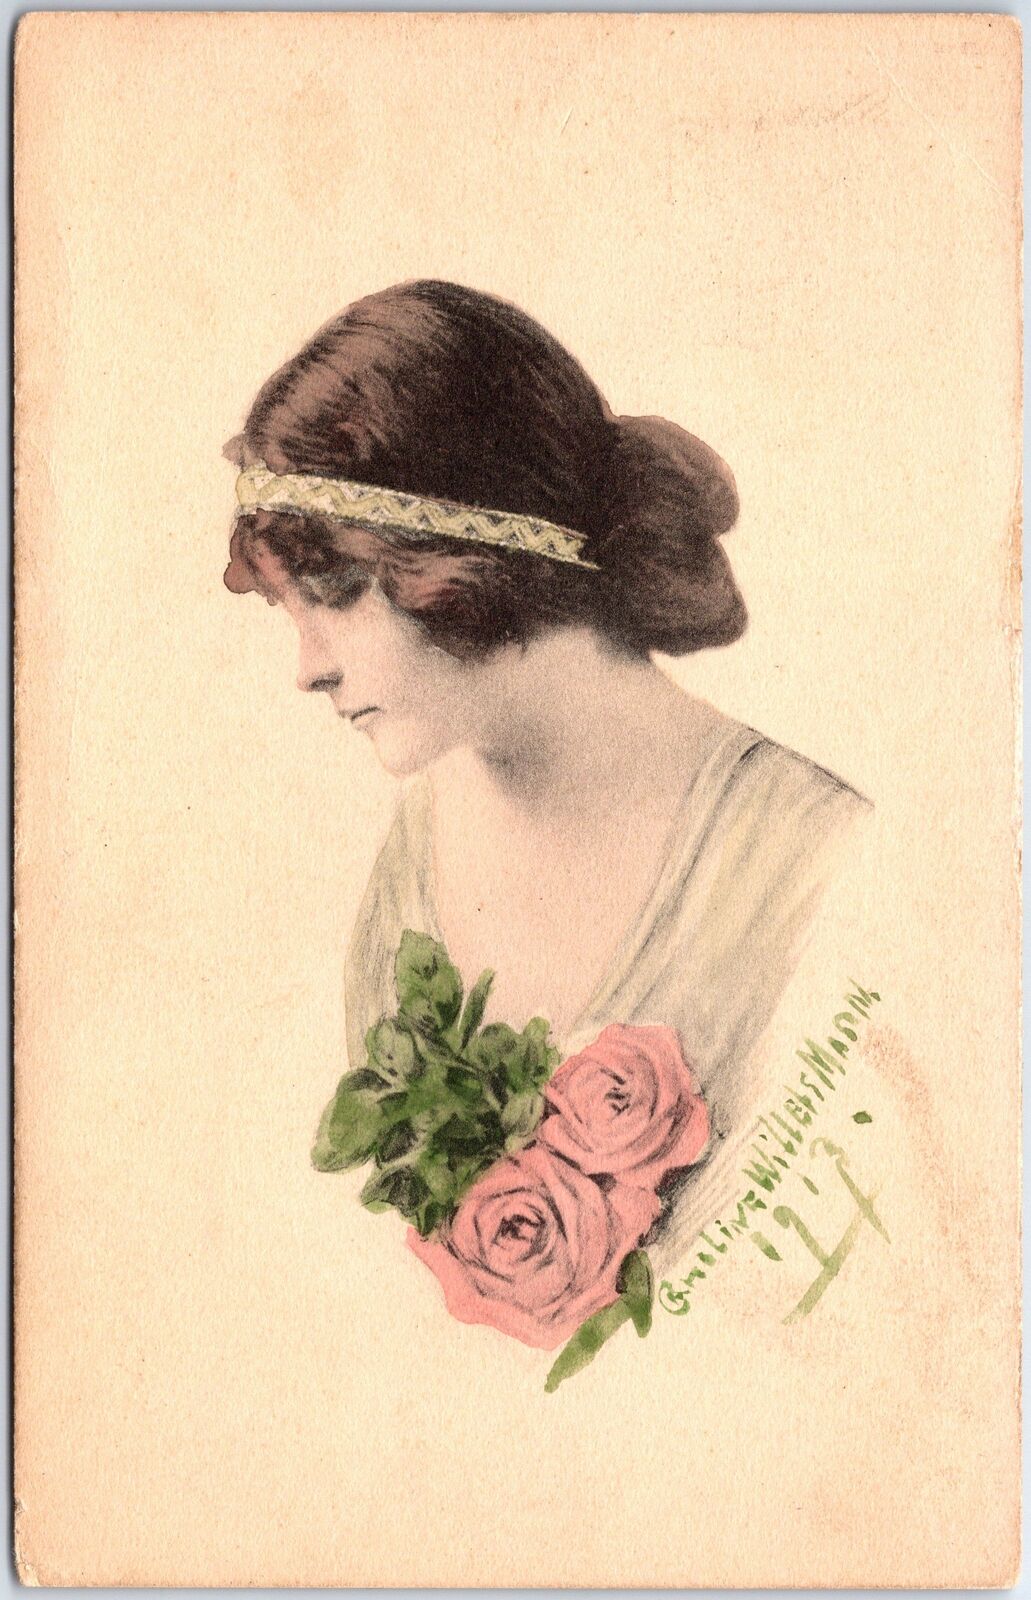 VINTAGE POSTCARD HAND-COLORED TINT ON ELEGANT LADY WATERCOLORED ART SIGNED 1913